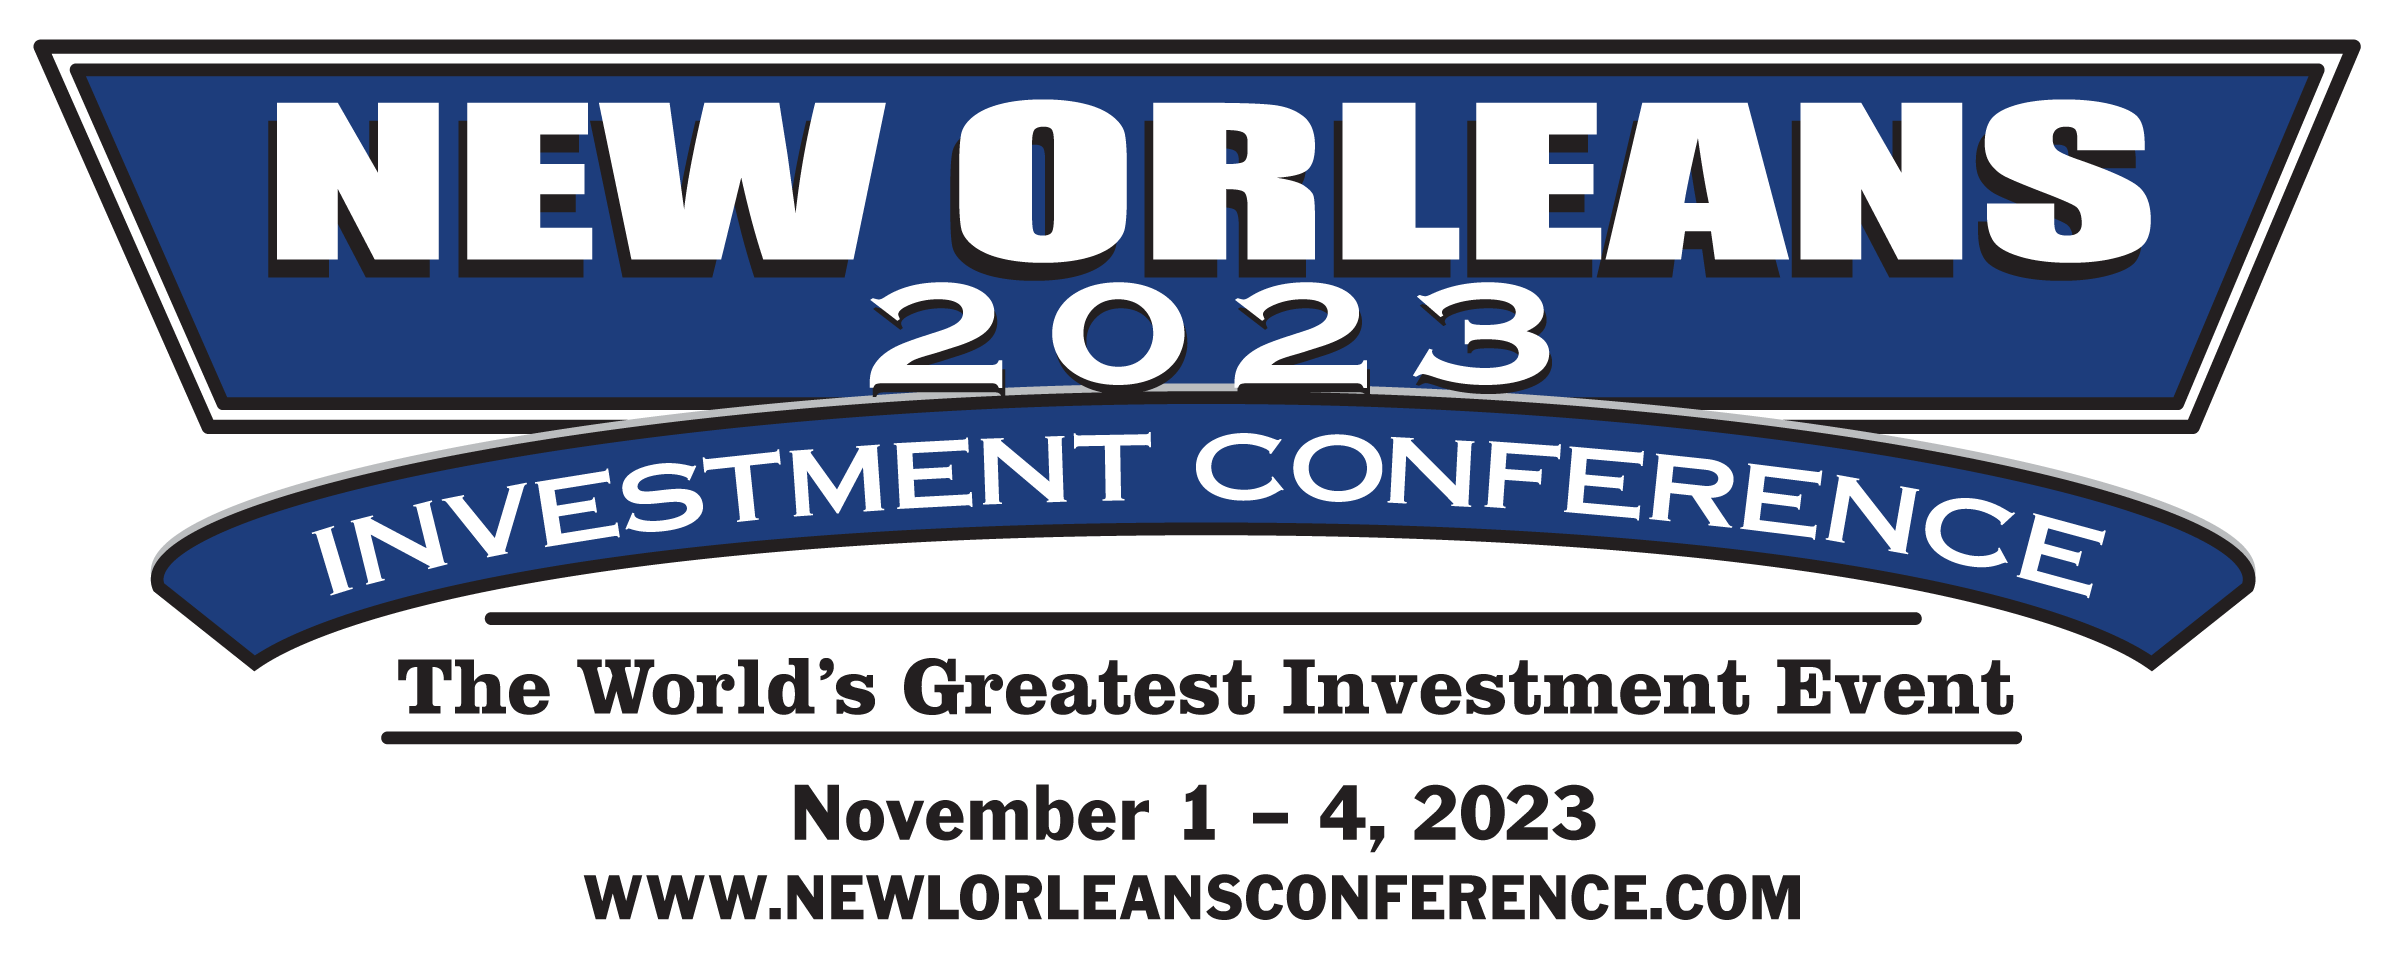 2023 New Orleans Investment Conference Logo with dates (November 1 - 4, 2023) and website (www.neworleansconference.com)